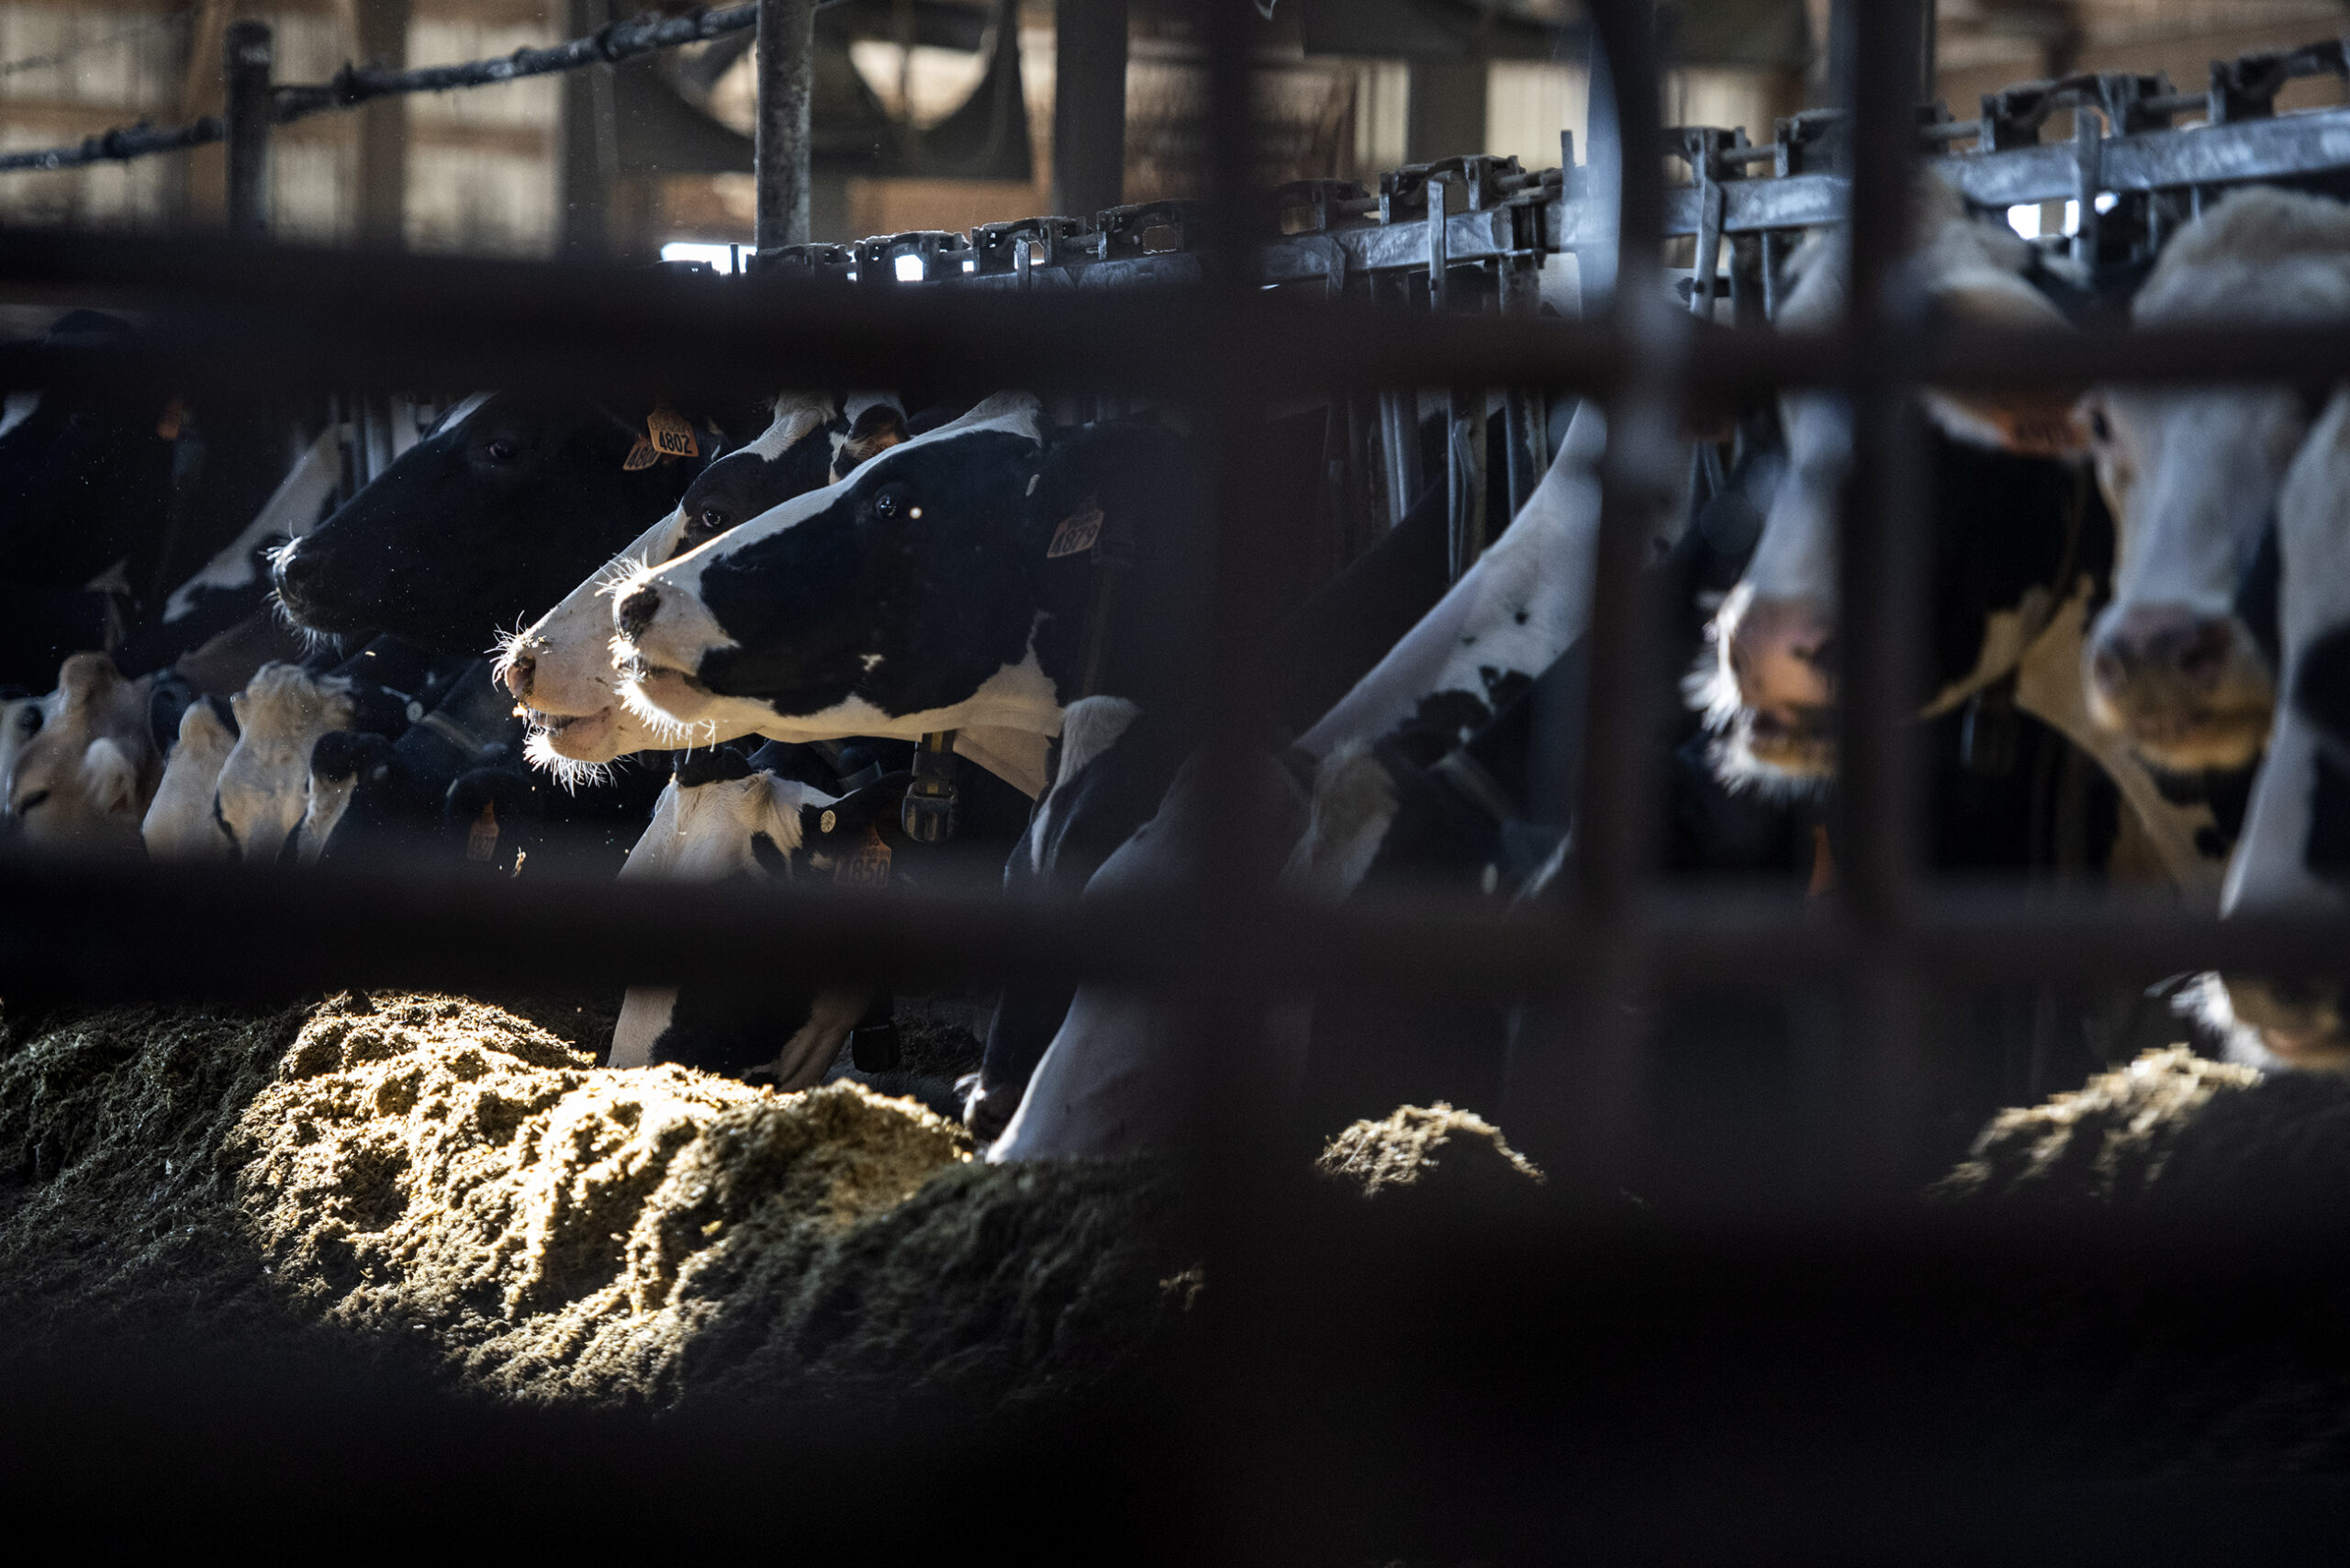 Dairy cows can be seen through a fence in a barn